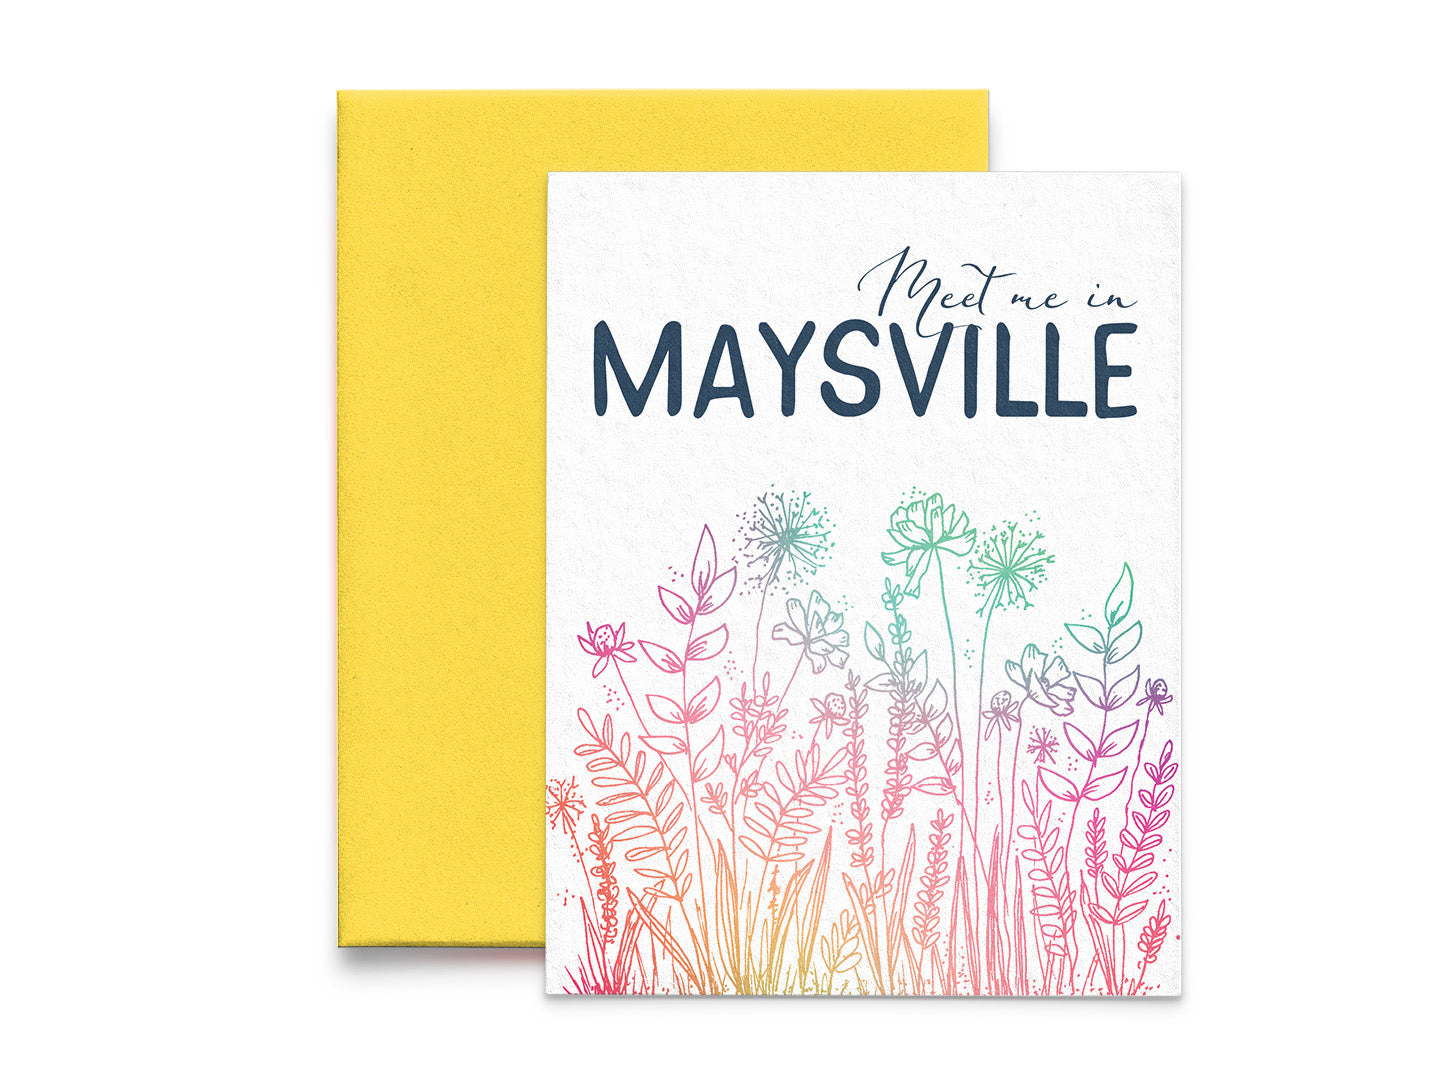 Meet Me in Maysville Local Love Greeting Card